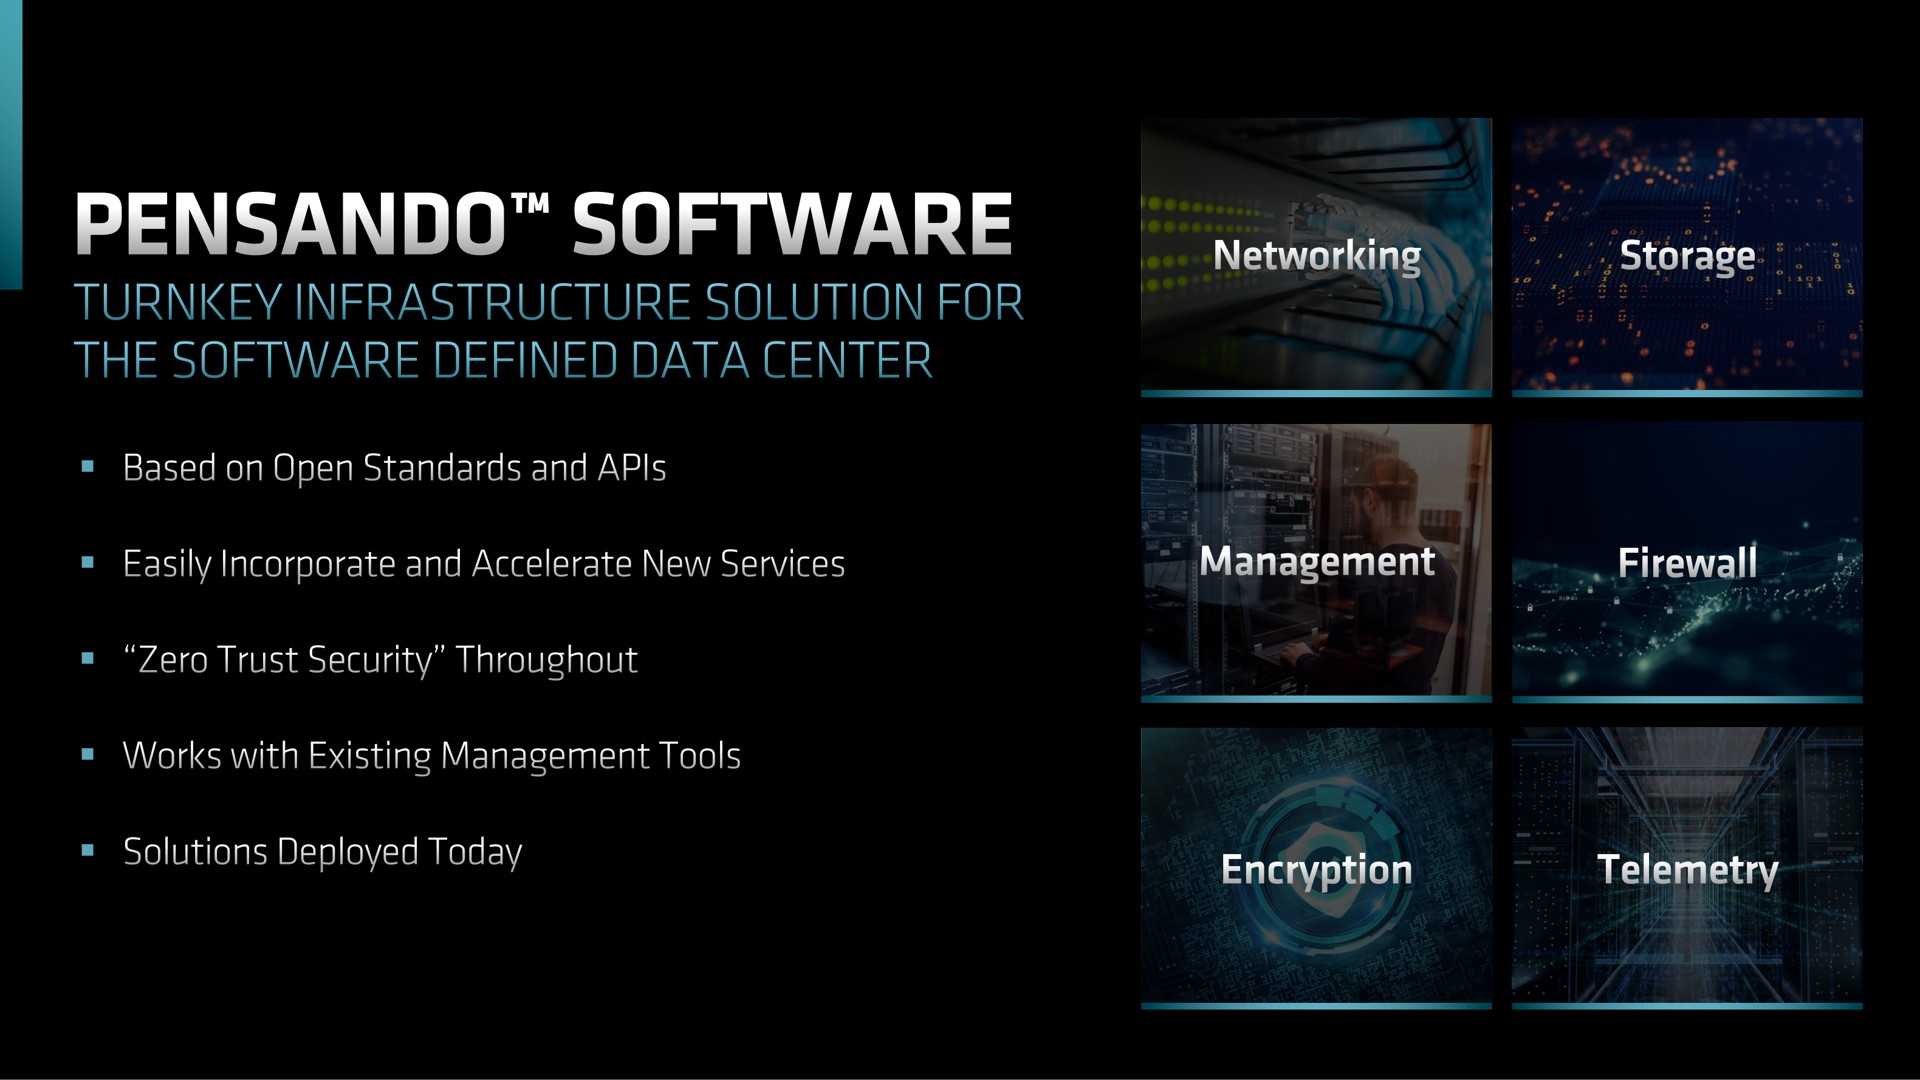 turnkey infrastructure solution for the defined data center zero trust security throughout | AMD